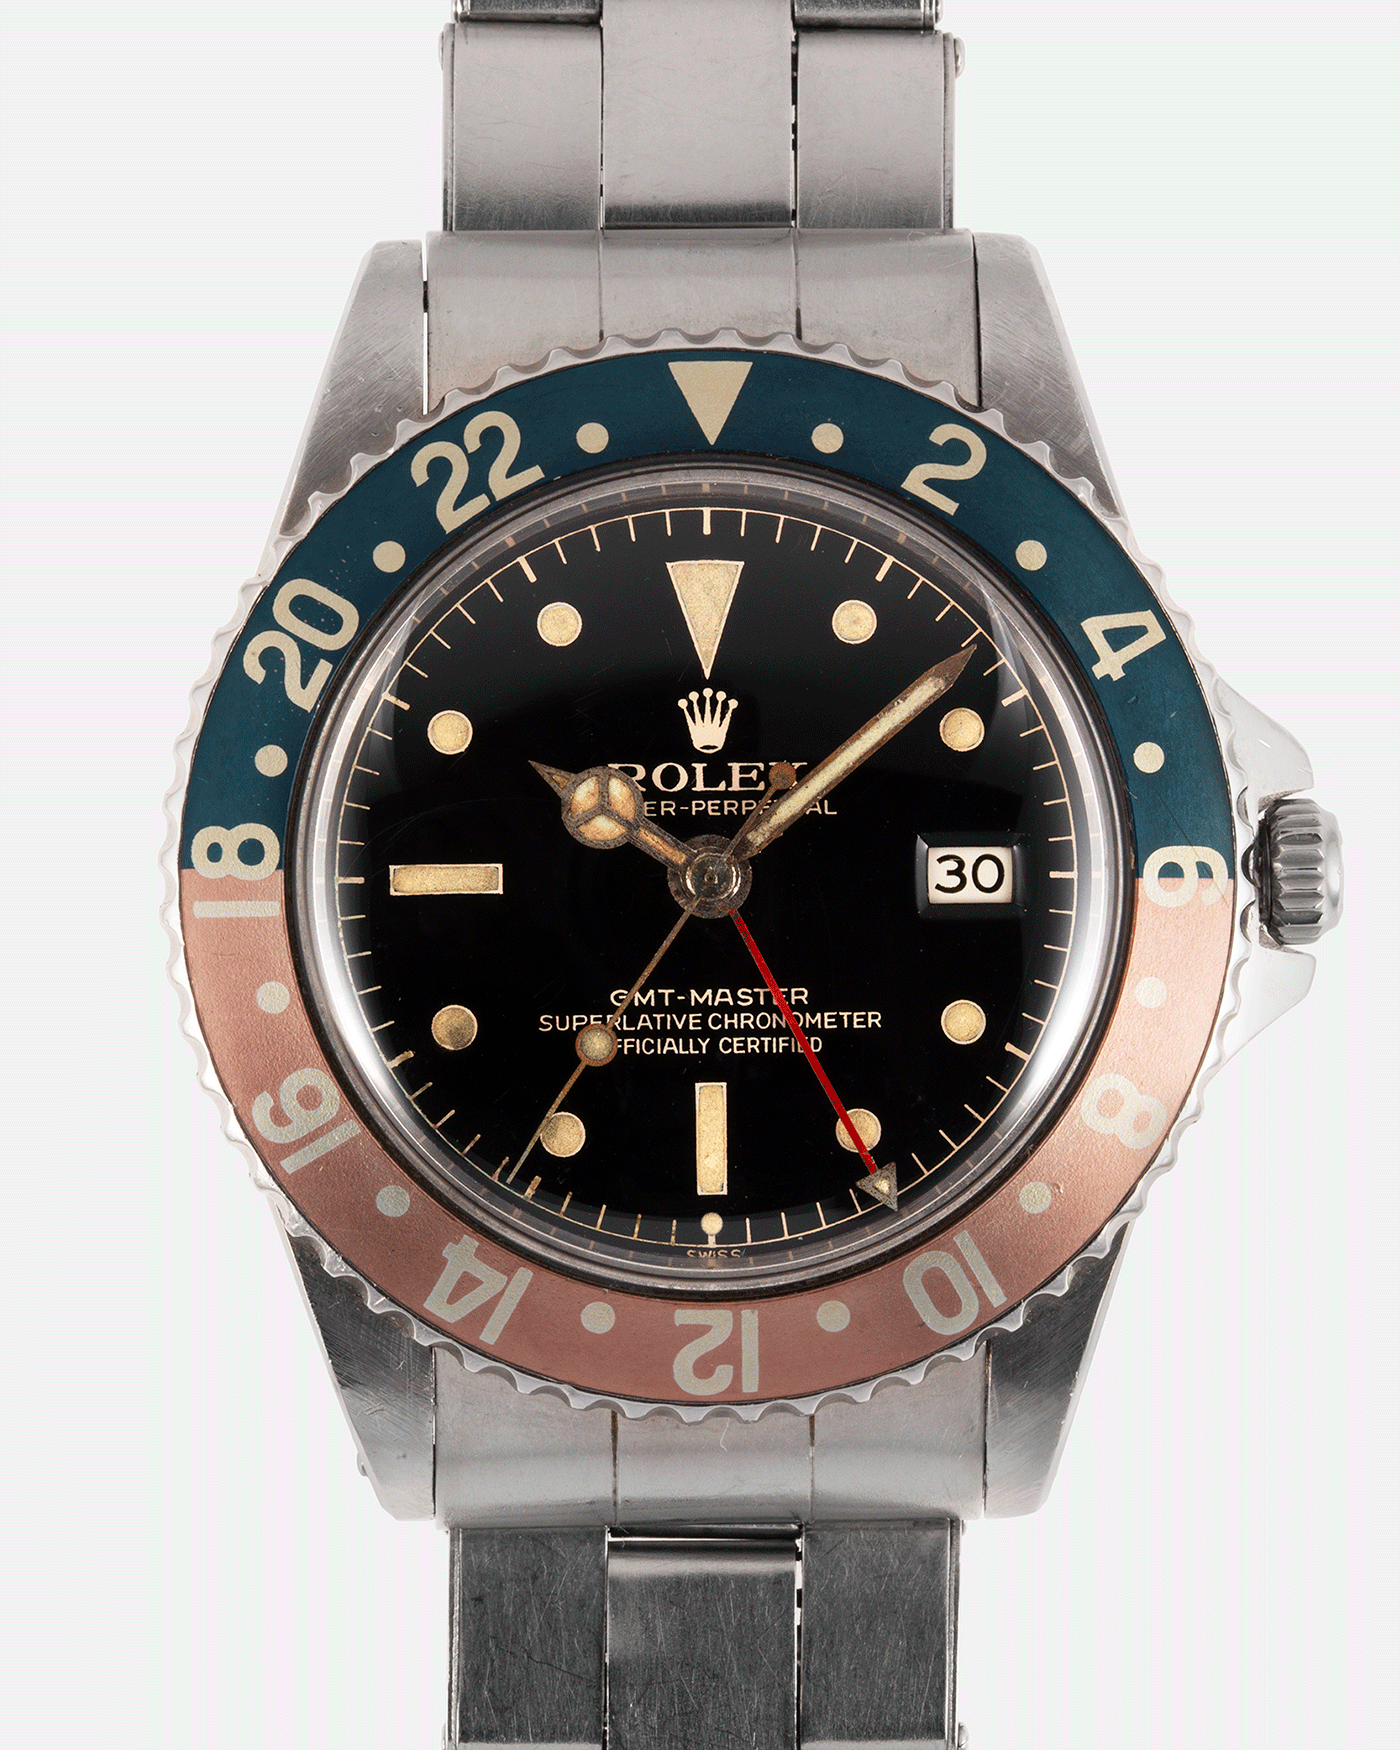 Brand: Rolex Year: 1963 Model: GMT-Master Reference Number: 1675 Serial Number: 87XXXX Material: Stainless Steel Movement: Cal. 1565 Case Diameter: 40mm Lug Width: 20mm Bracelet/Strap: Stainless Steel Rolex C&I Riveted Elastic Bracelet